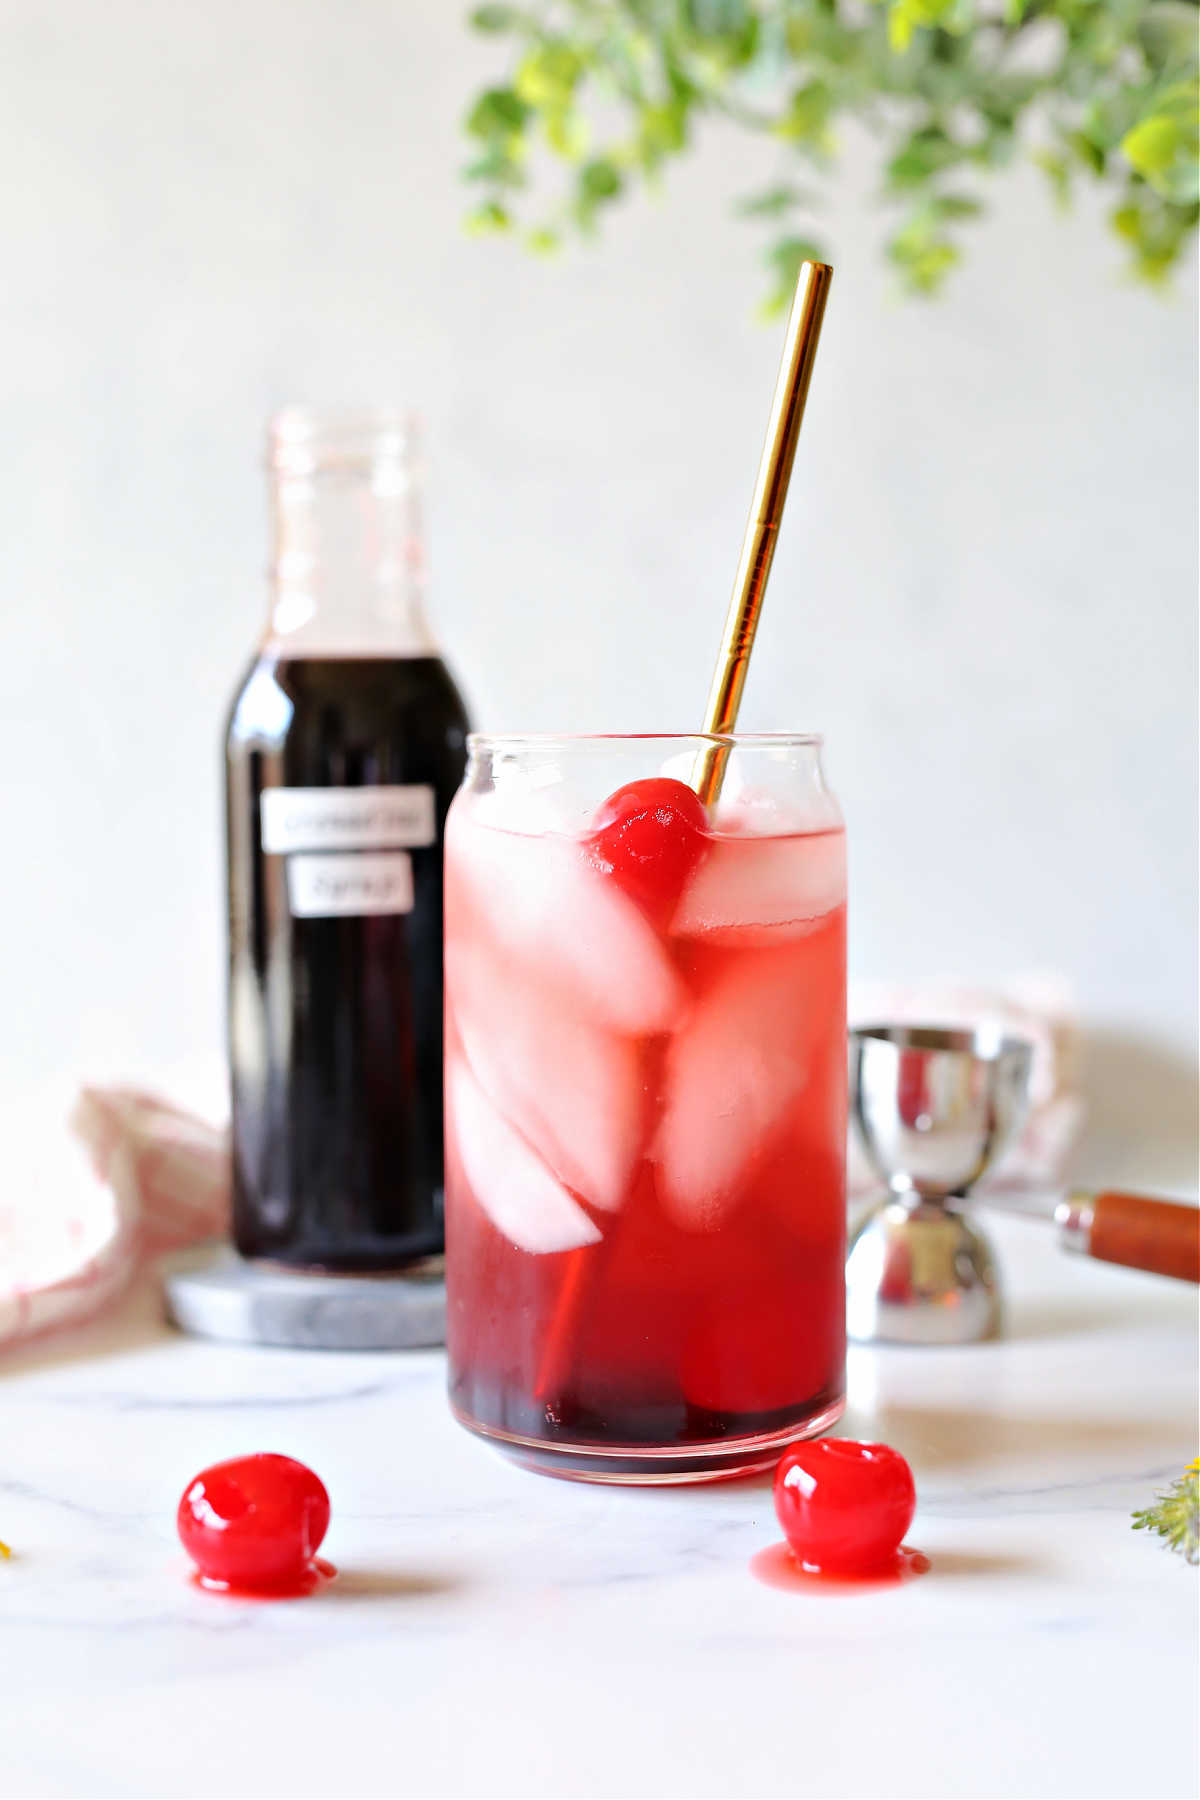 sweet refreshing cherry grenadine syrup and lemon or lime soda beverage called a Shirley Temple